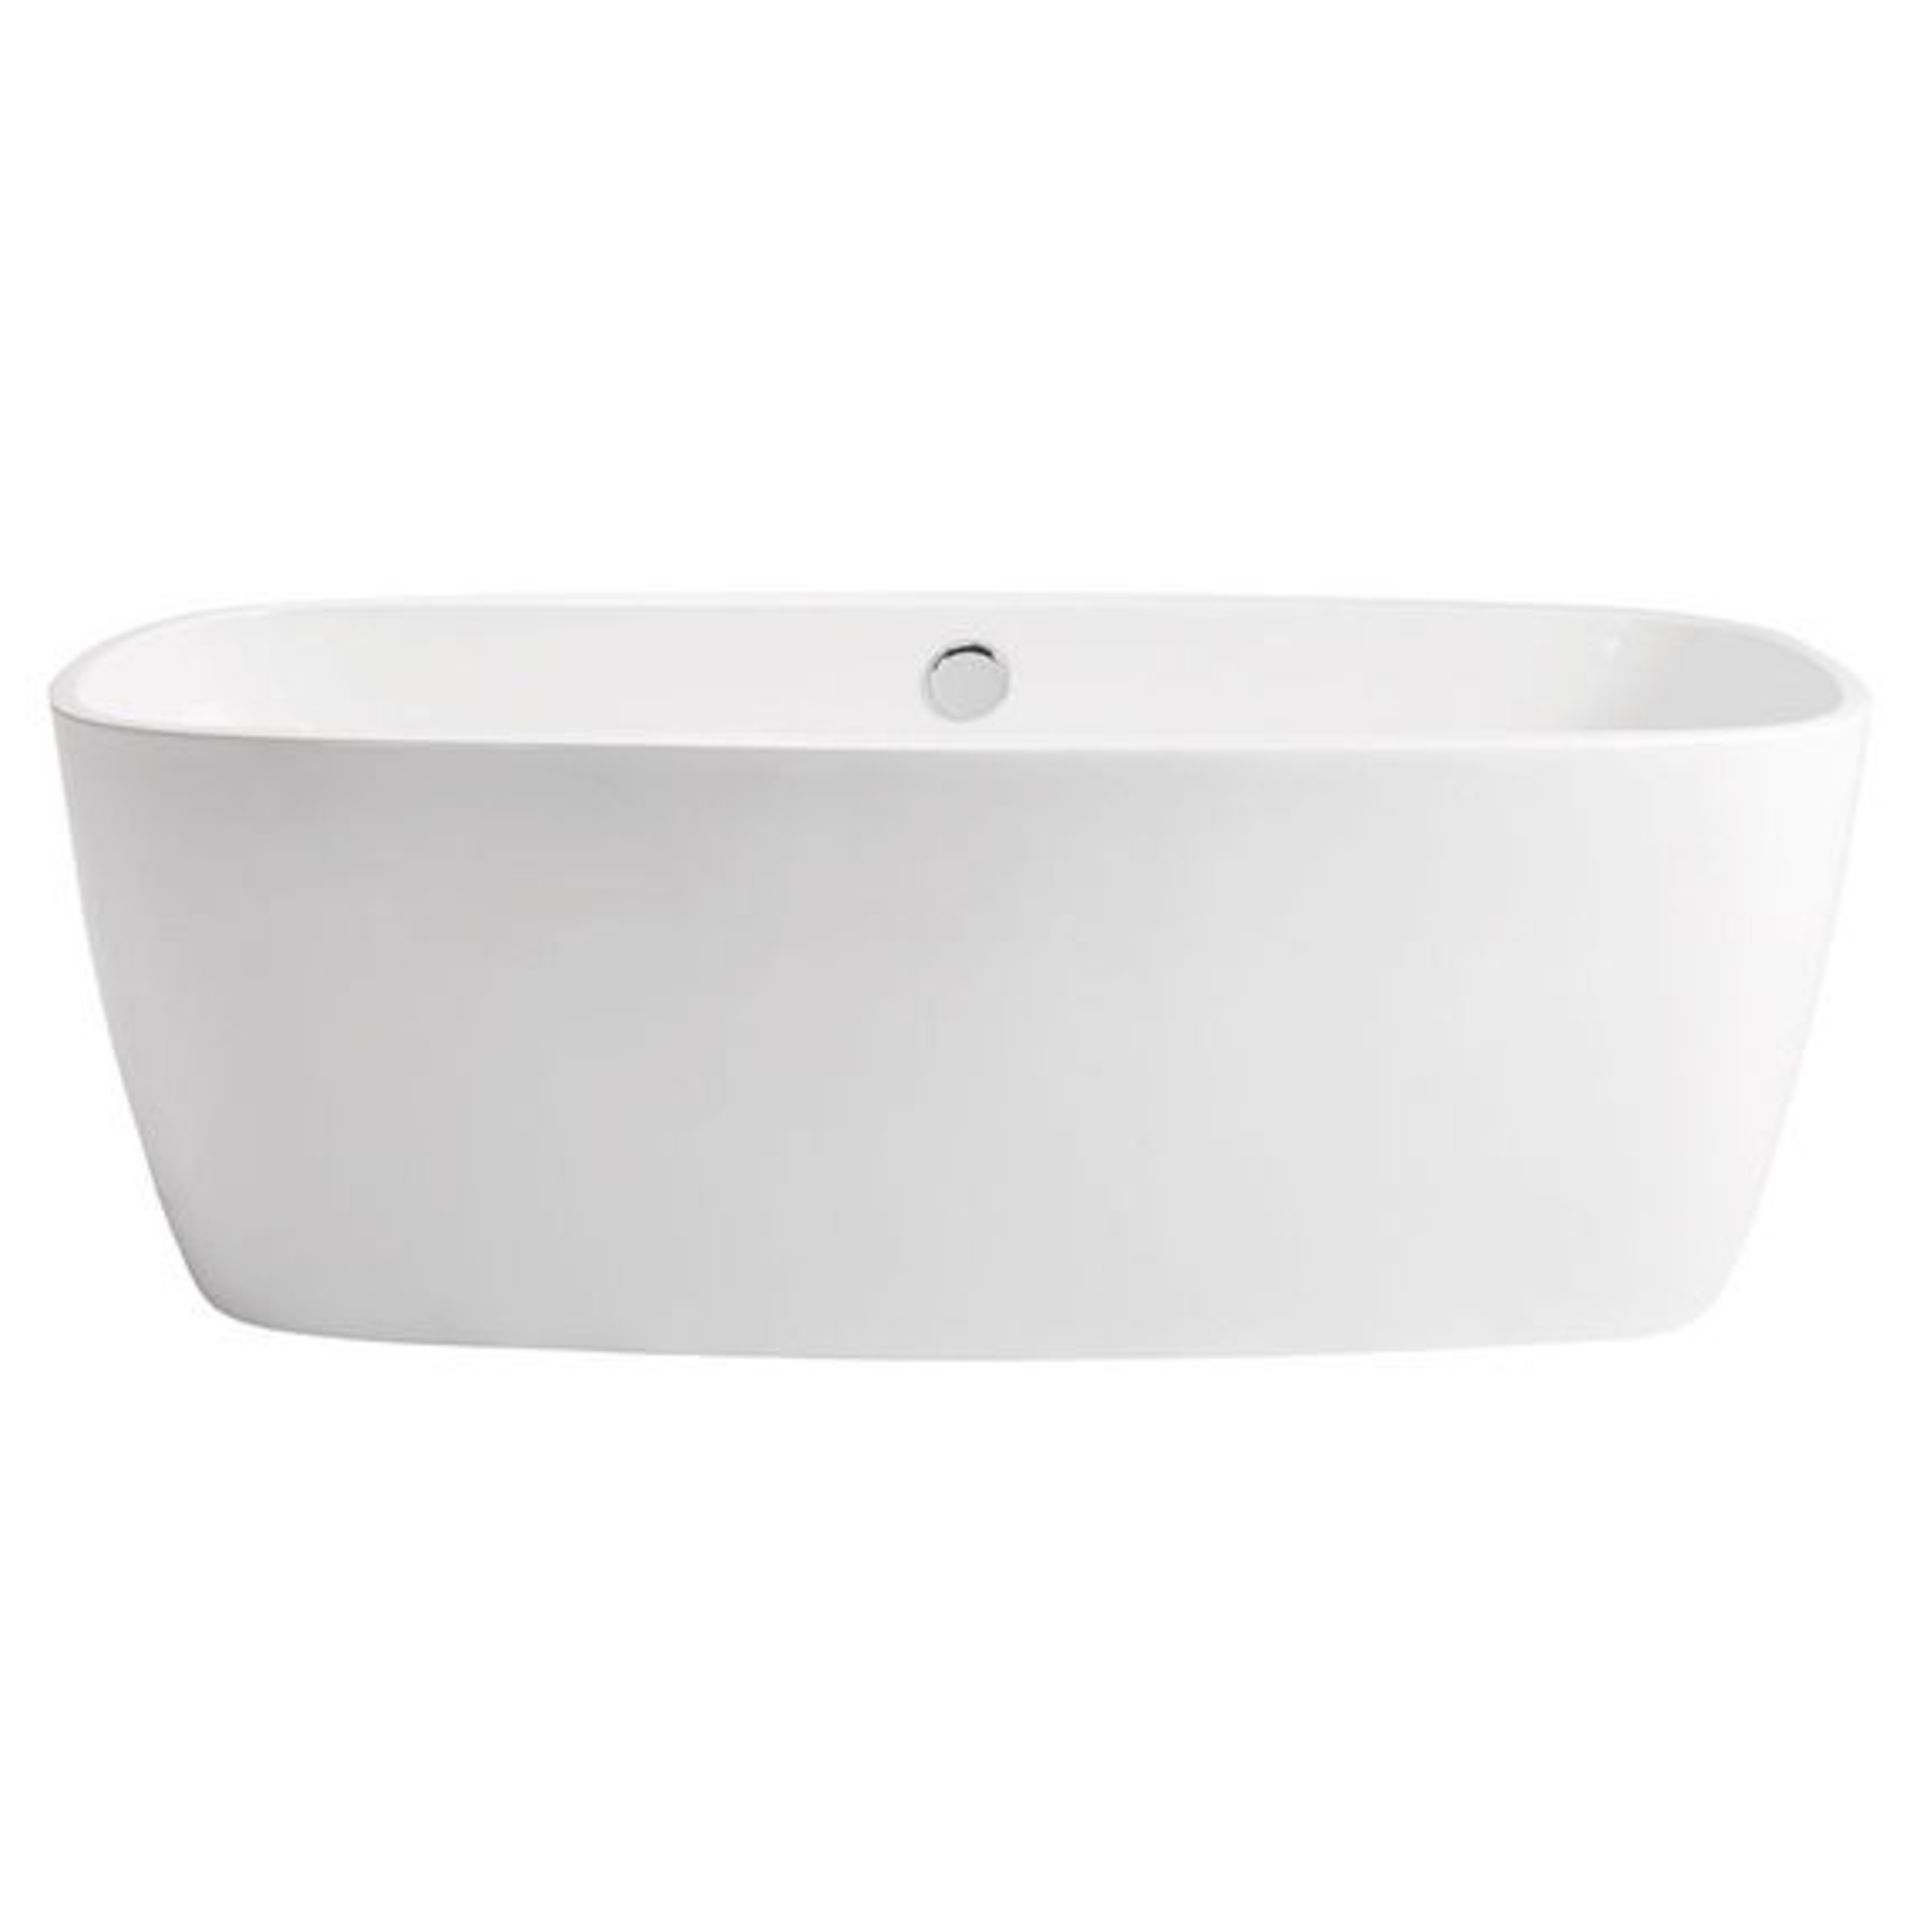 Lucite 1700 Double skinned contemporary free standing bath. Super deep, 195 ltrs capacity and fitted